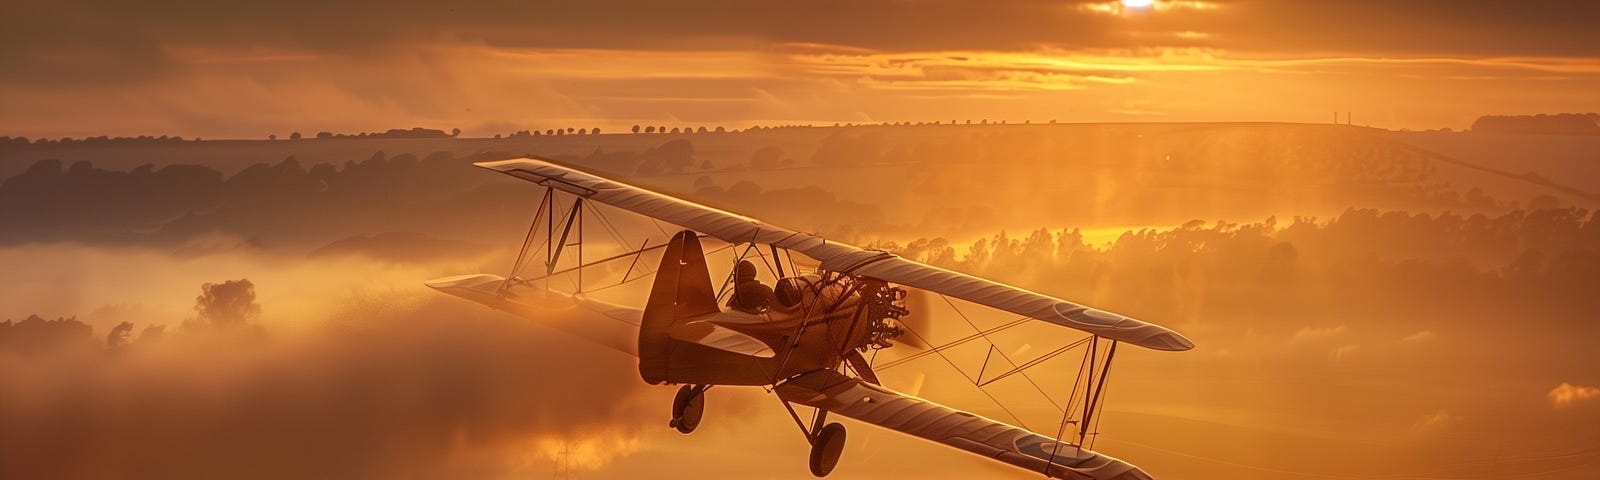 A vintage bi-plane taking up into a red sunset sky